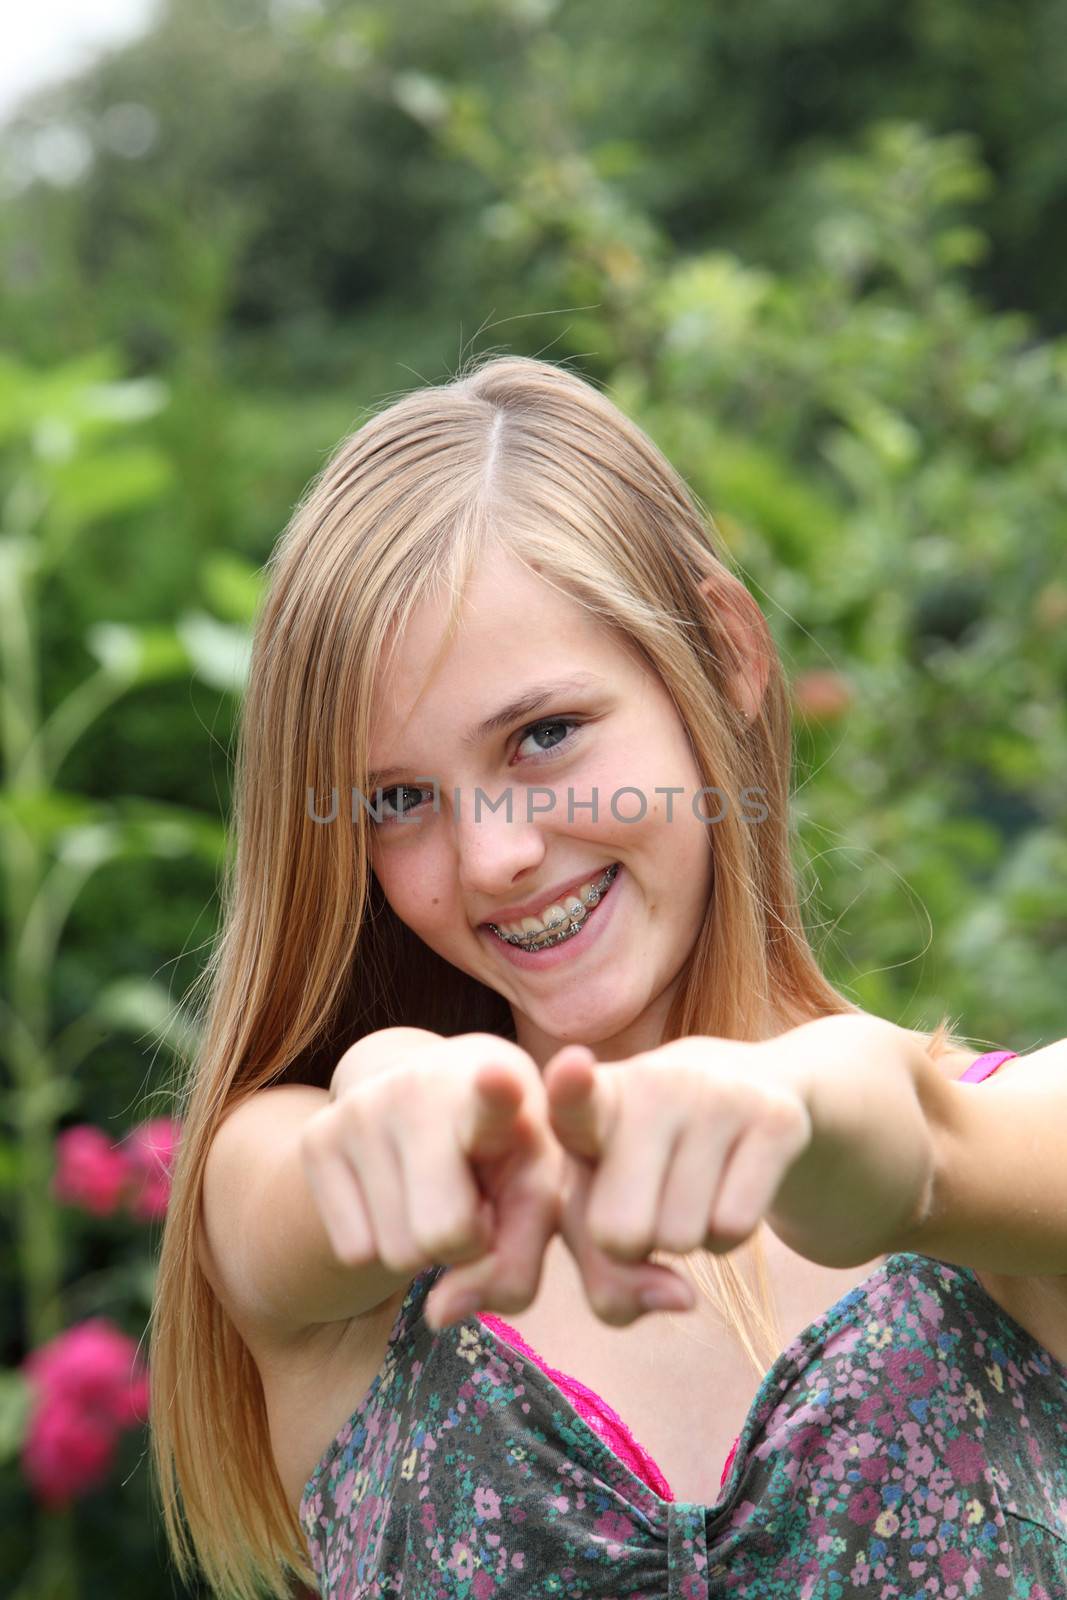 Young woman pointing her fingers at the camera with a beautiful smile on her face while standing outdoors in a garden